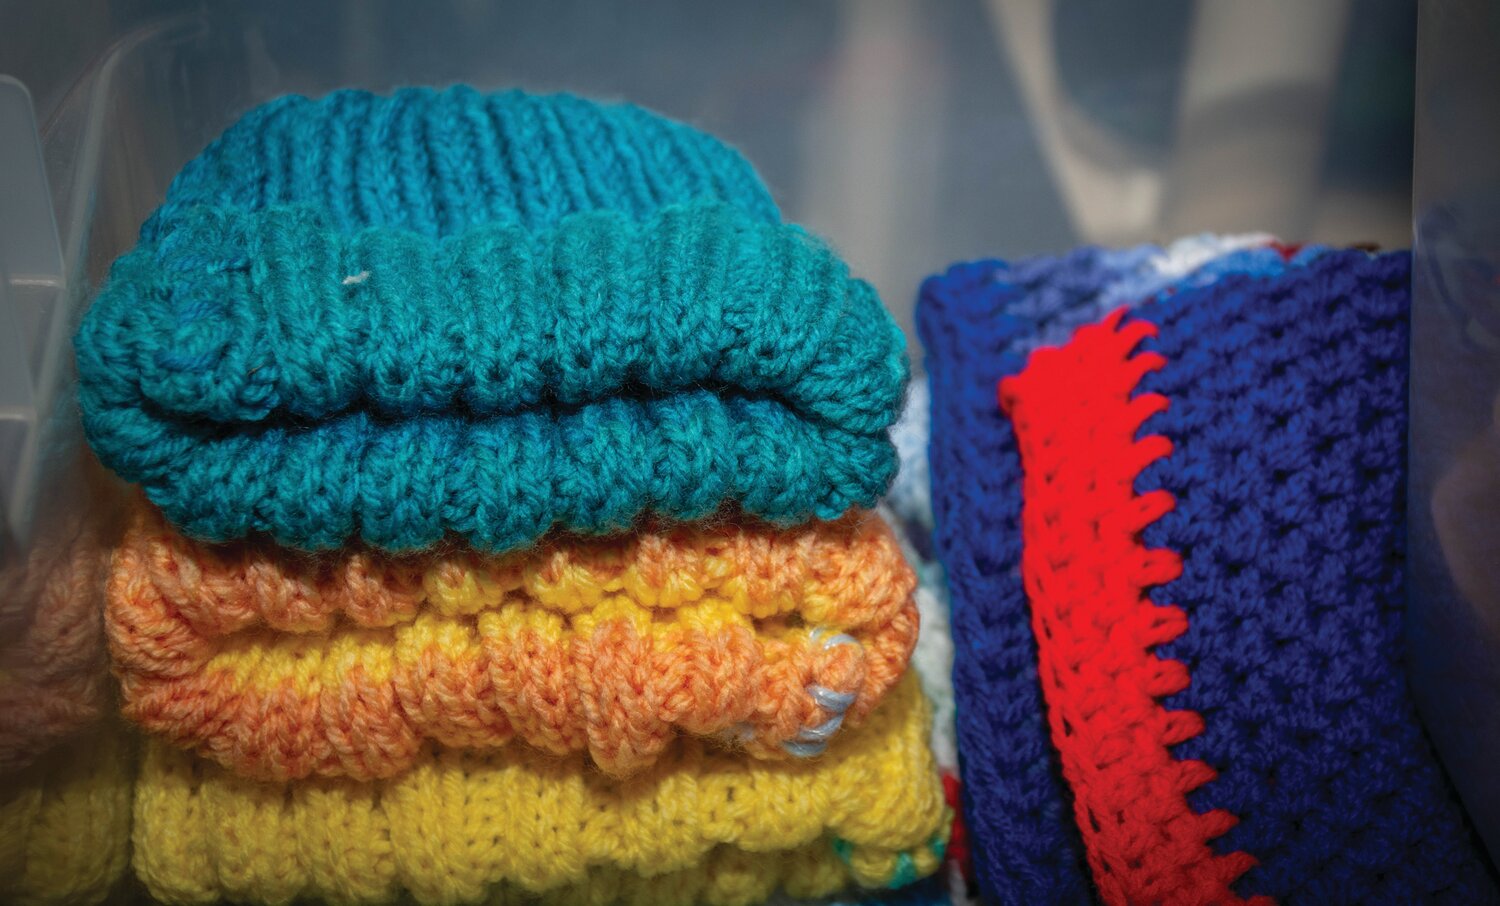 The Baby Bureau offers seasonally appropriate items, like knit hats during cooler months.